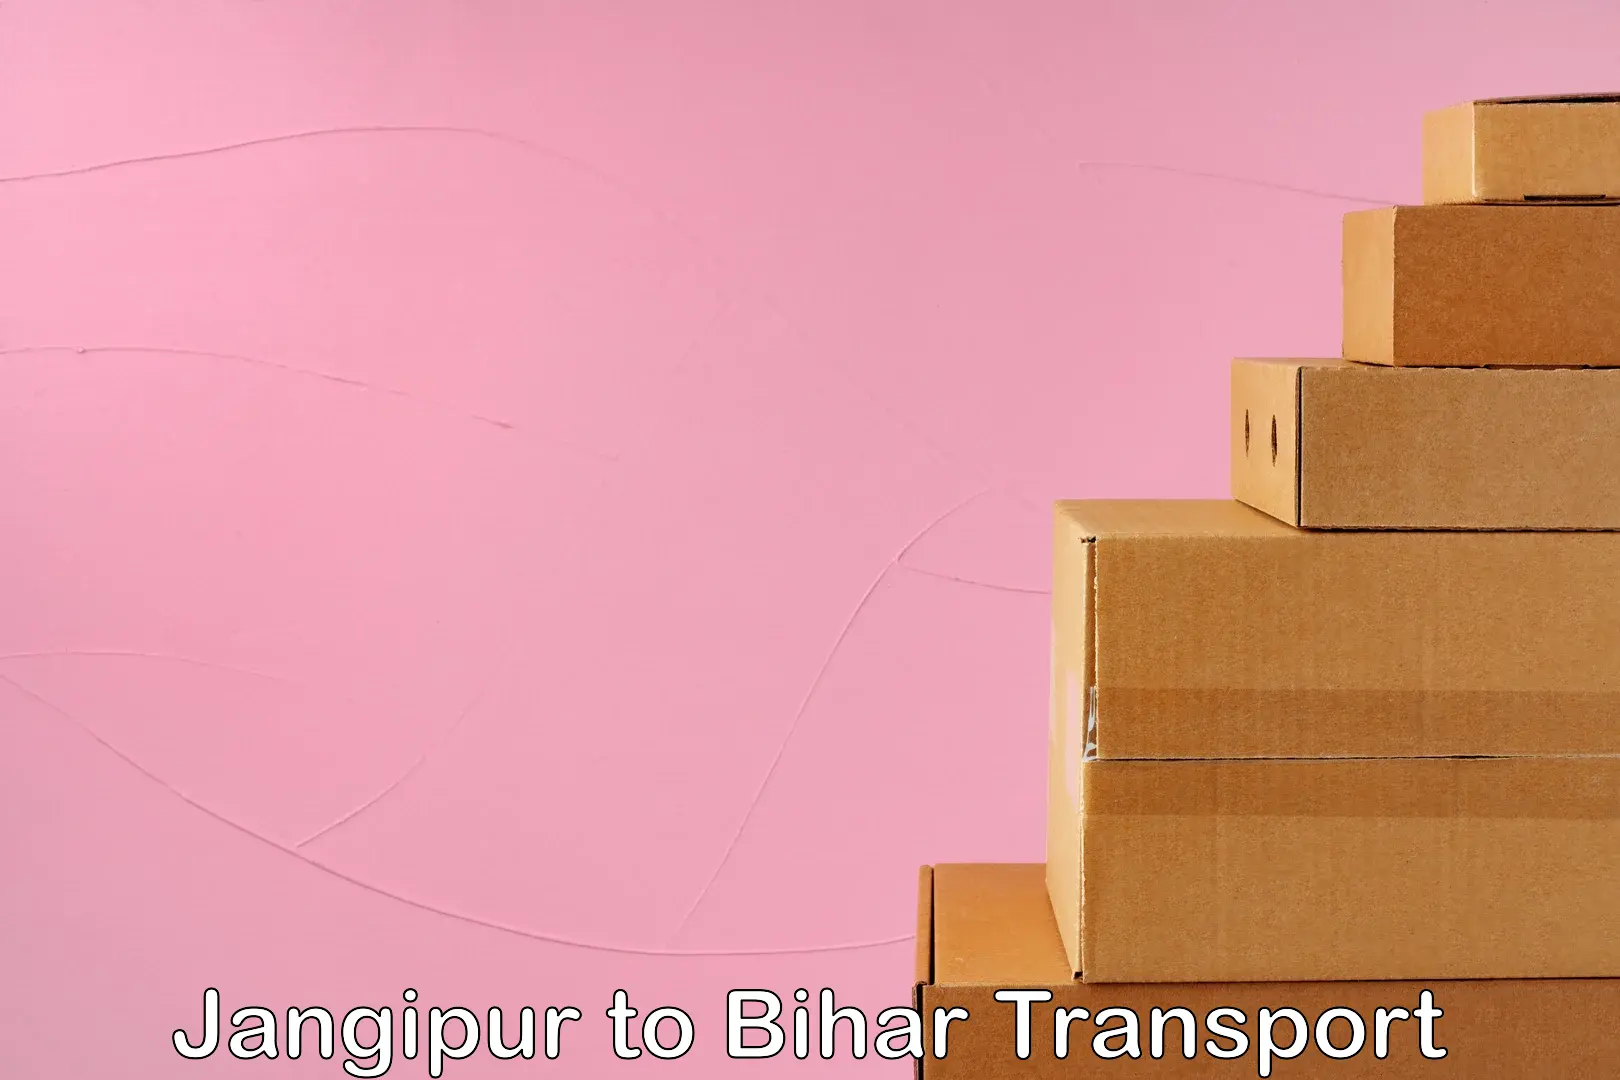 Air freight transport services Jangipur to Mohammadpur